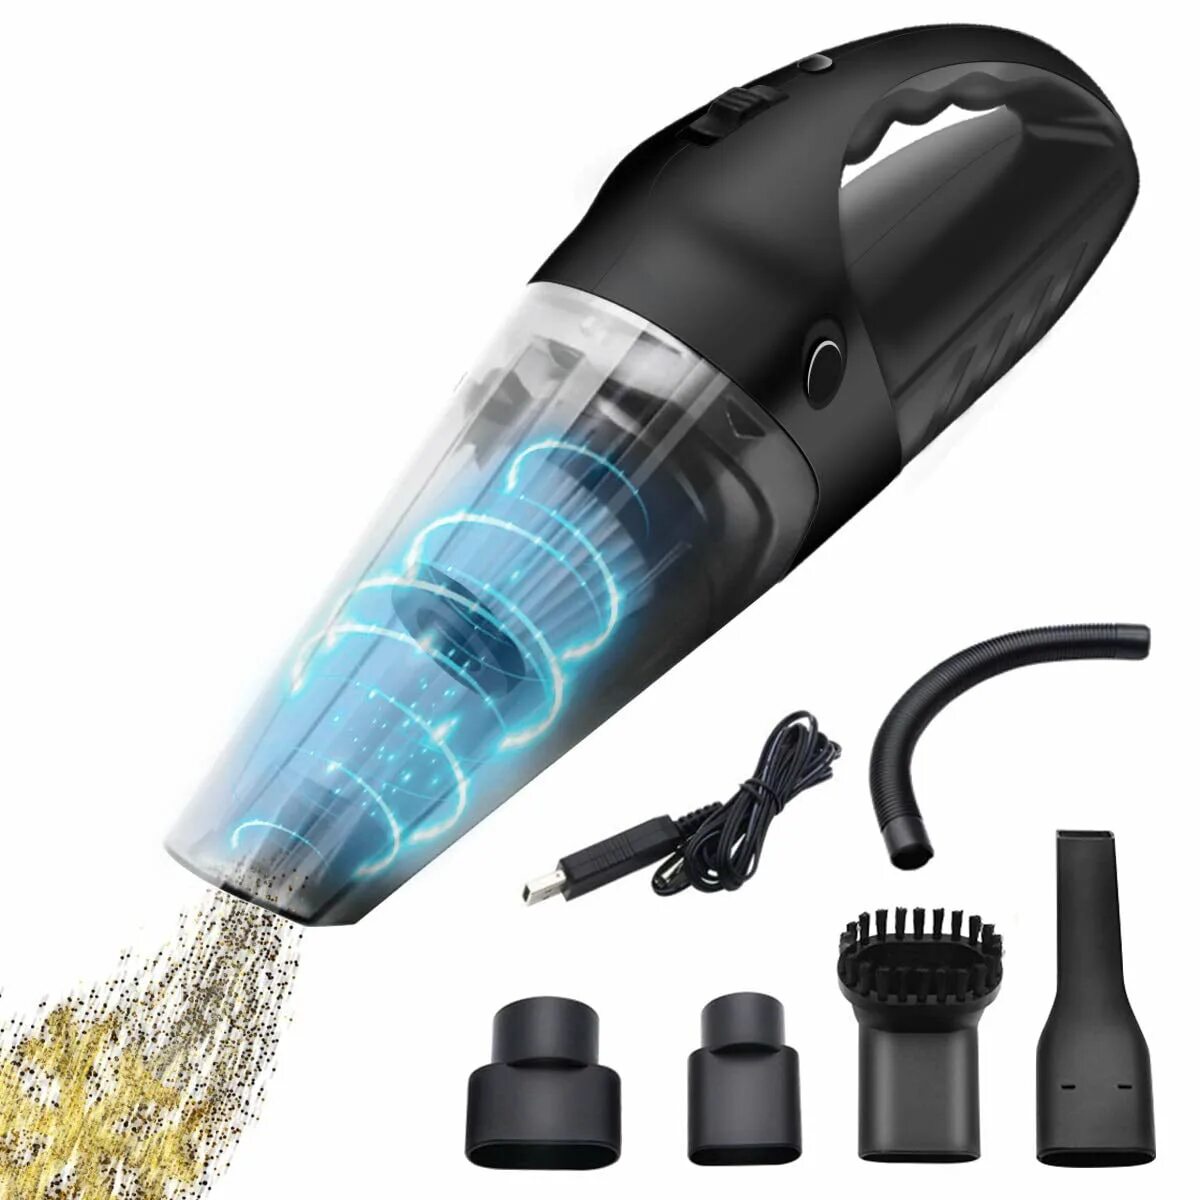 12v 120w car Vacuum Cleaner strong Suction. Автомобильный пылесос Xiaomi Coclean Portable Vacuum Cleaner (Coclean-GXCQ). Ручной пылесос Mini Handy. Ручной пылесос PNG.